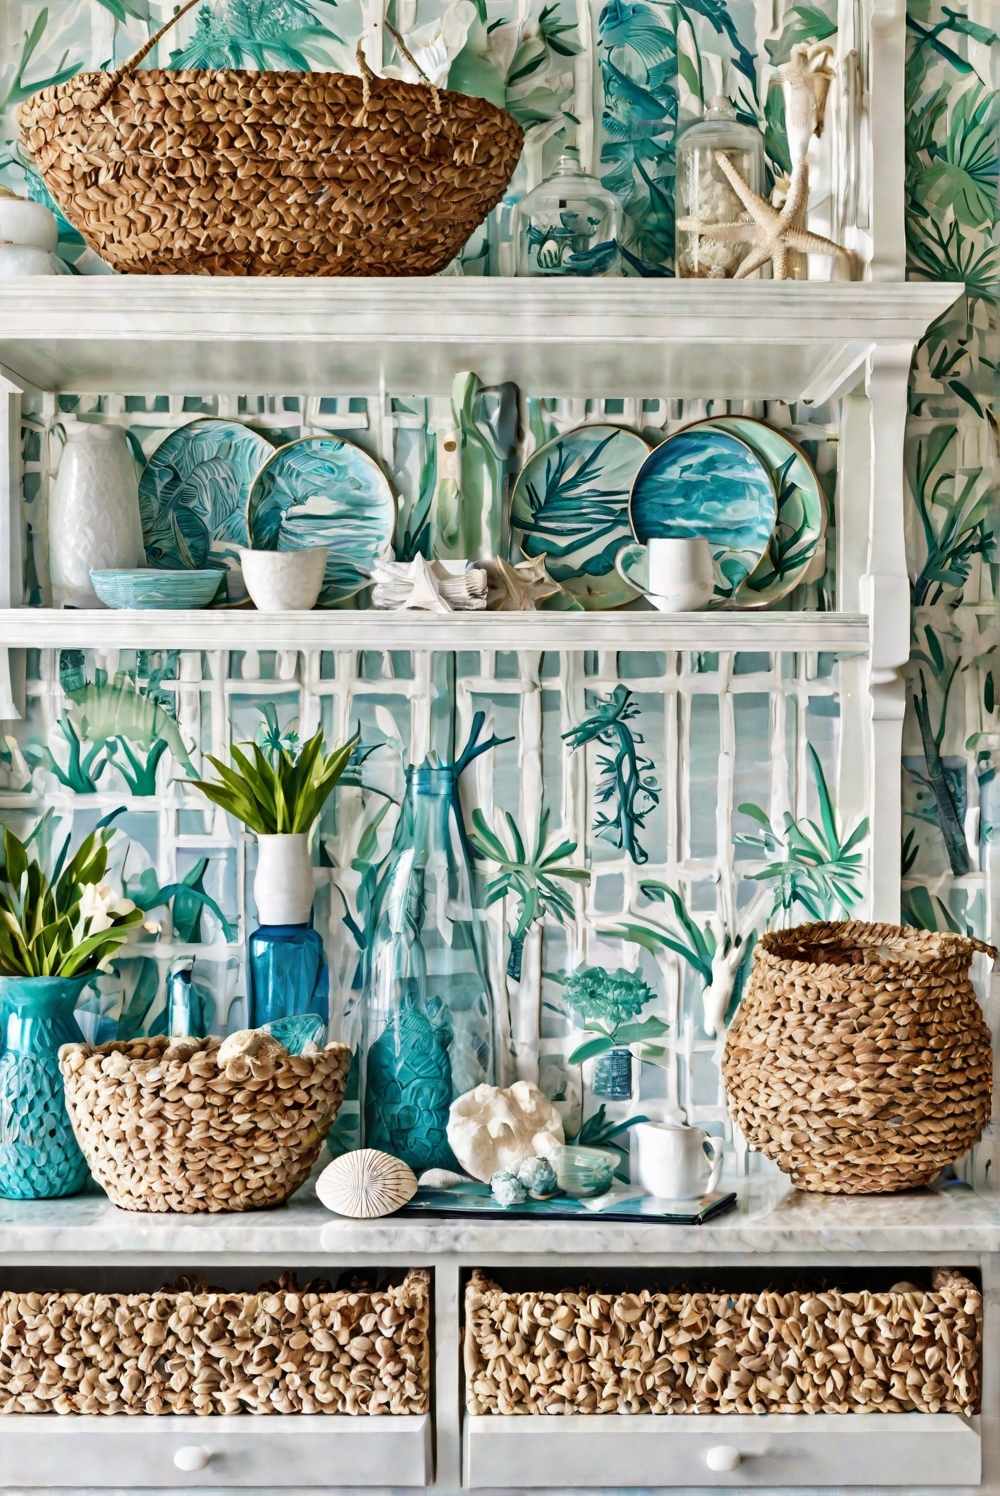 Coastal Retreat: Bringing the Beach into Your Cabinets